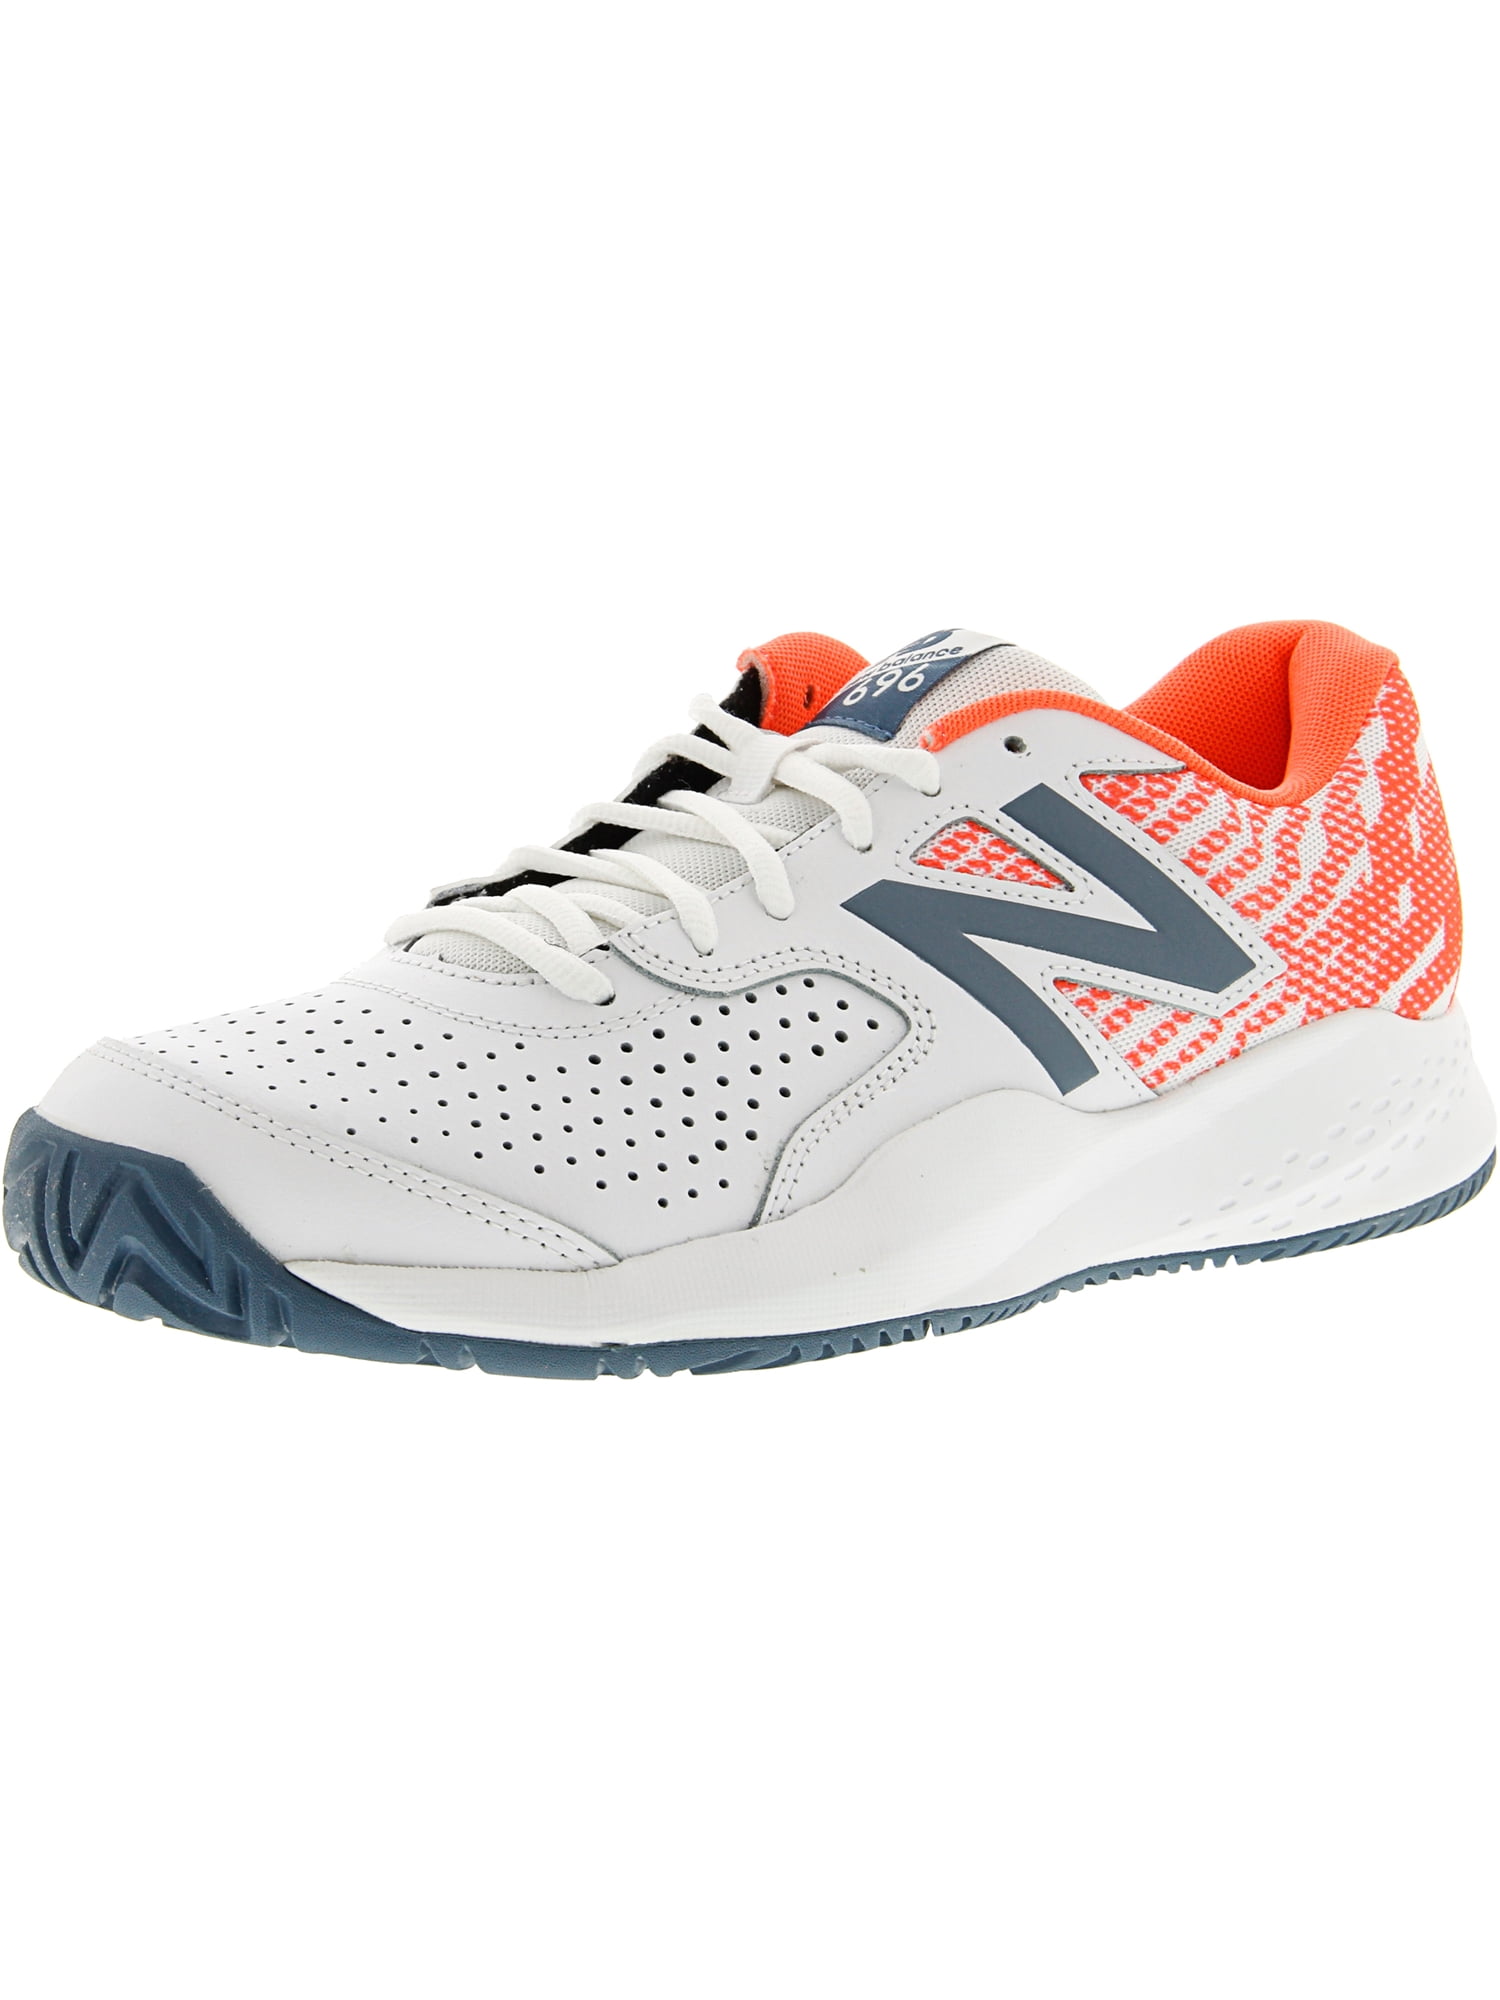 top selling tennis shoes